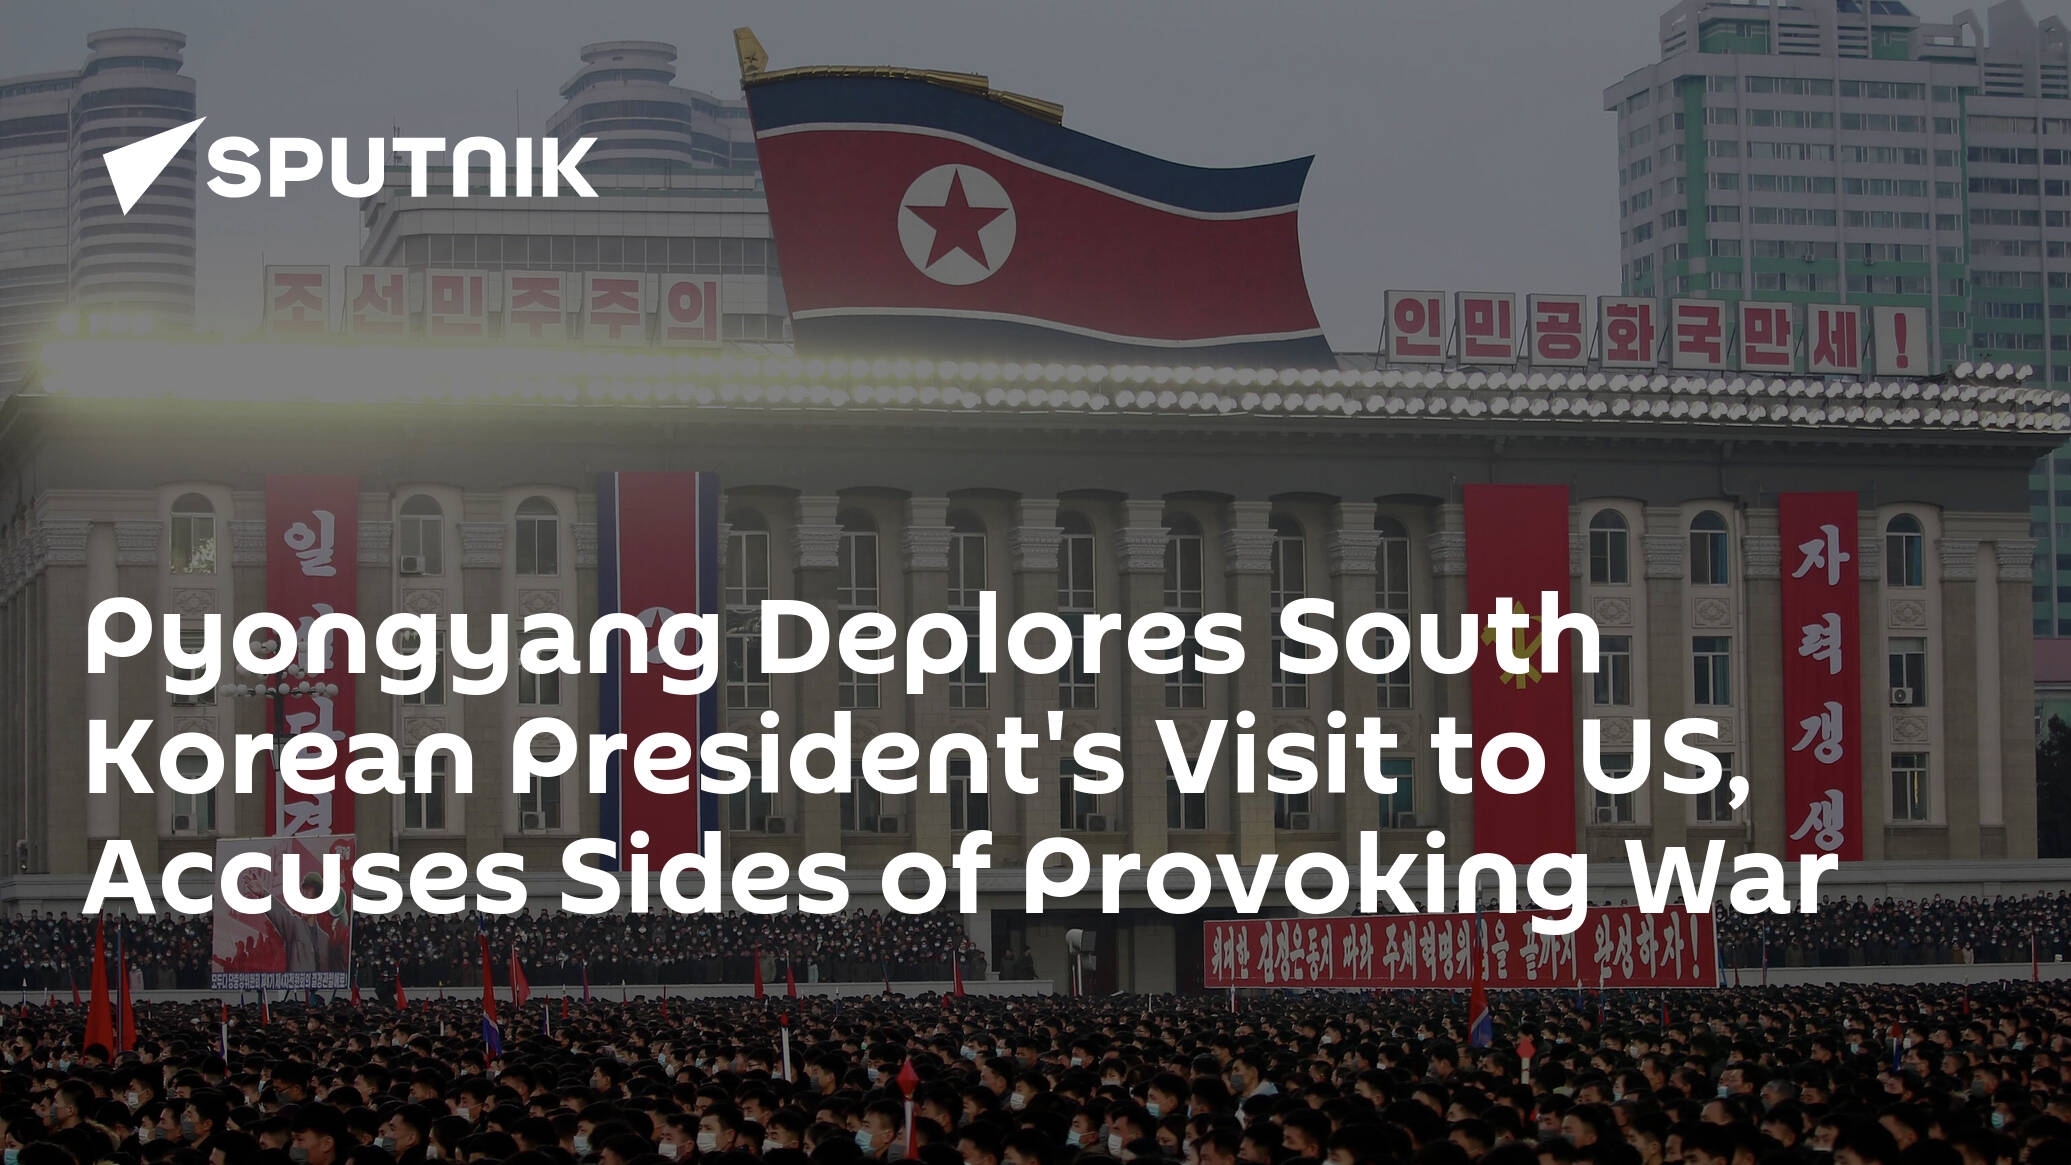 Pyongyang Deplores South Korean President's Visit to US, Accuses Sides of Provoking War